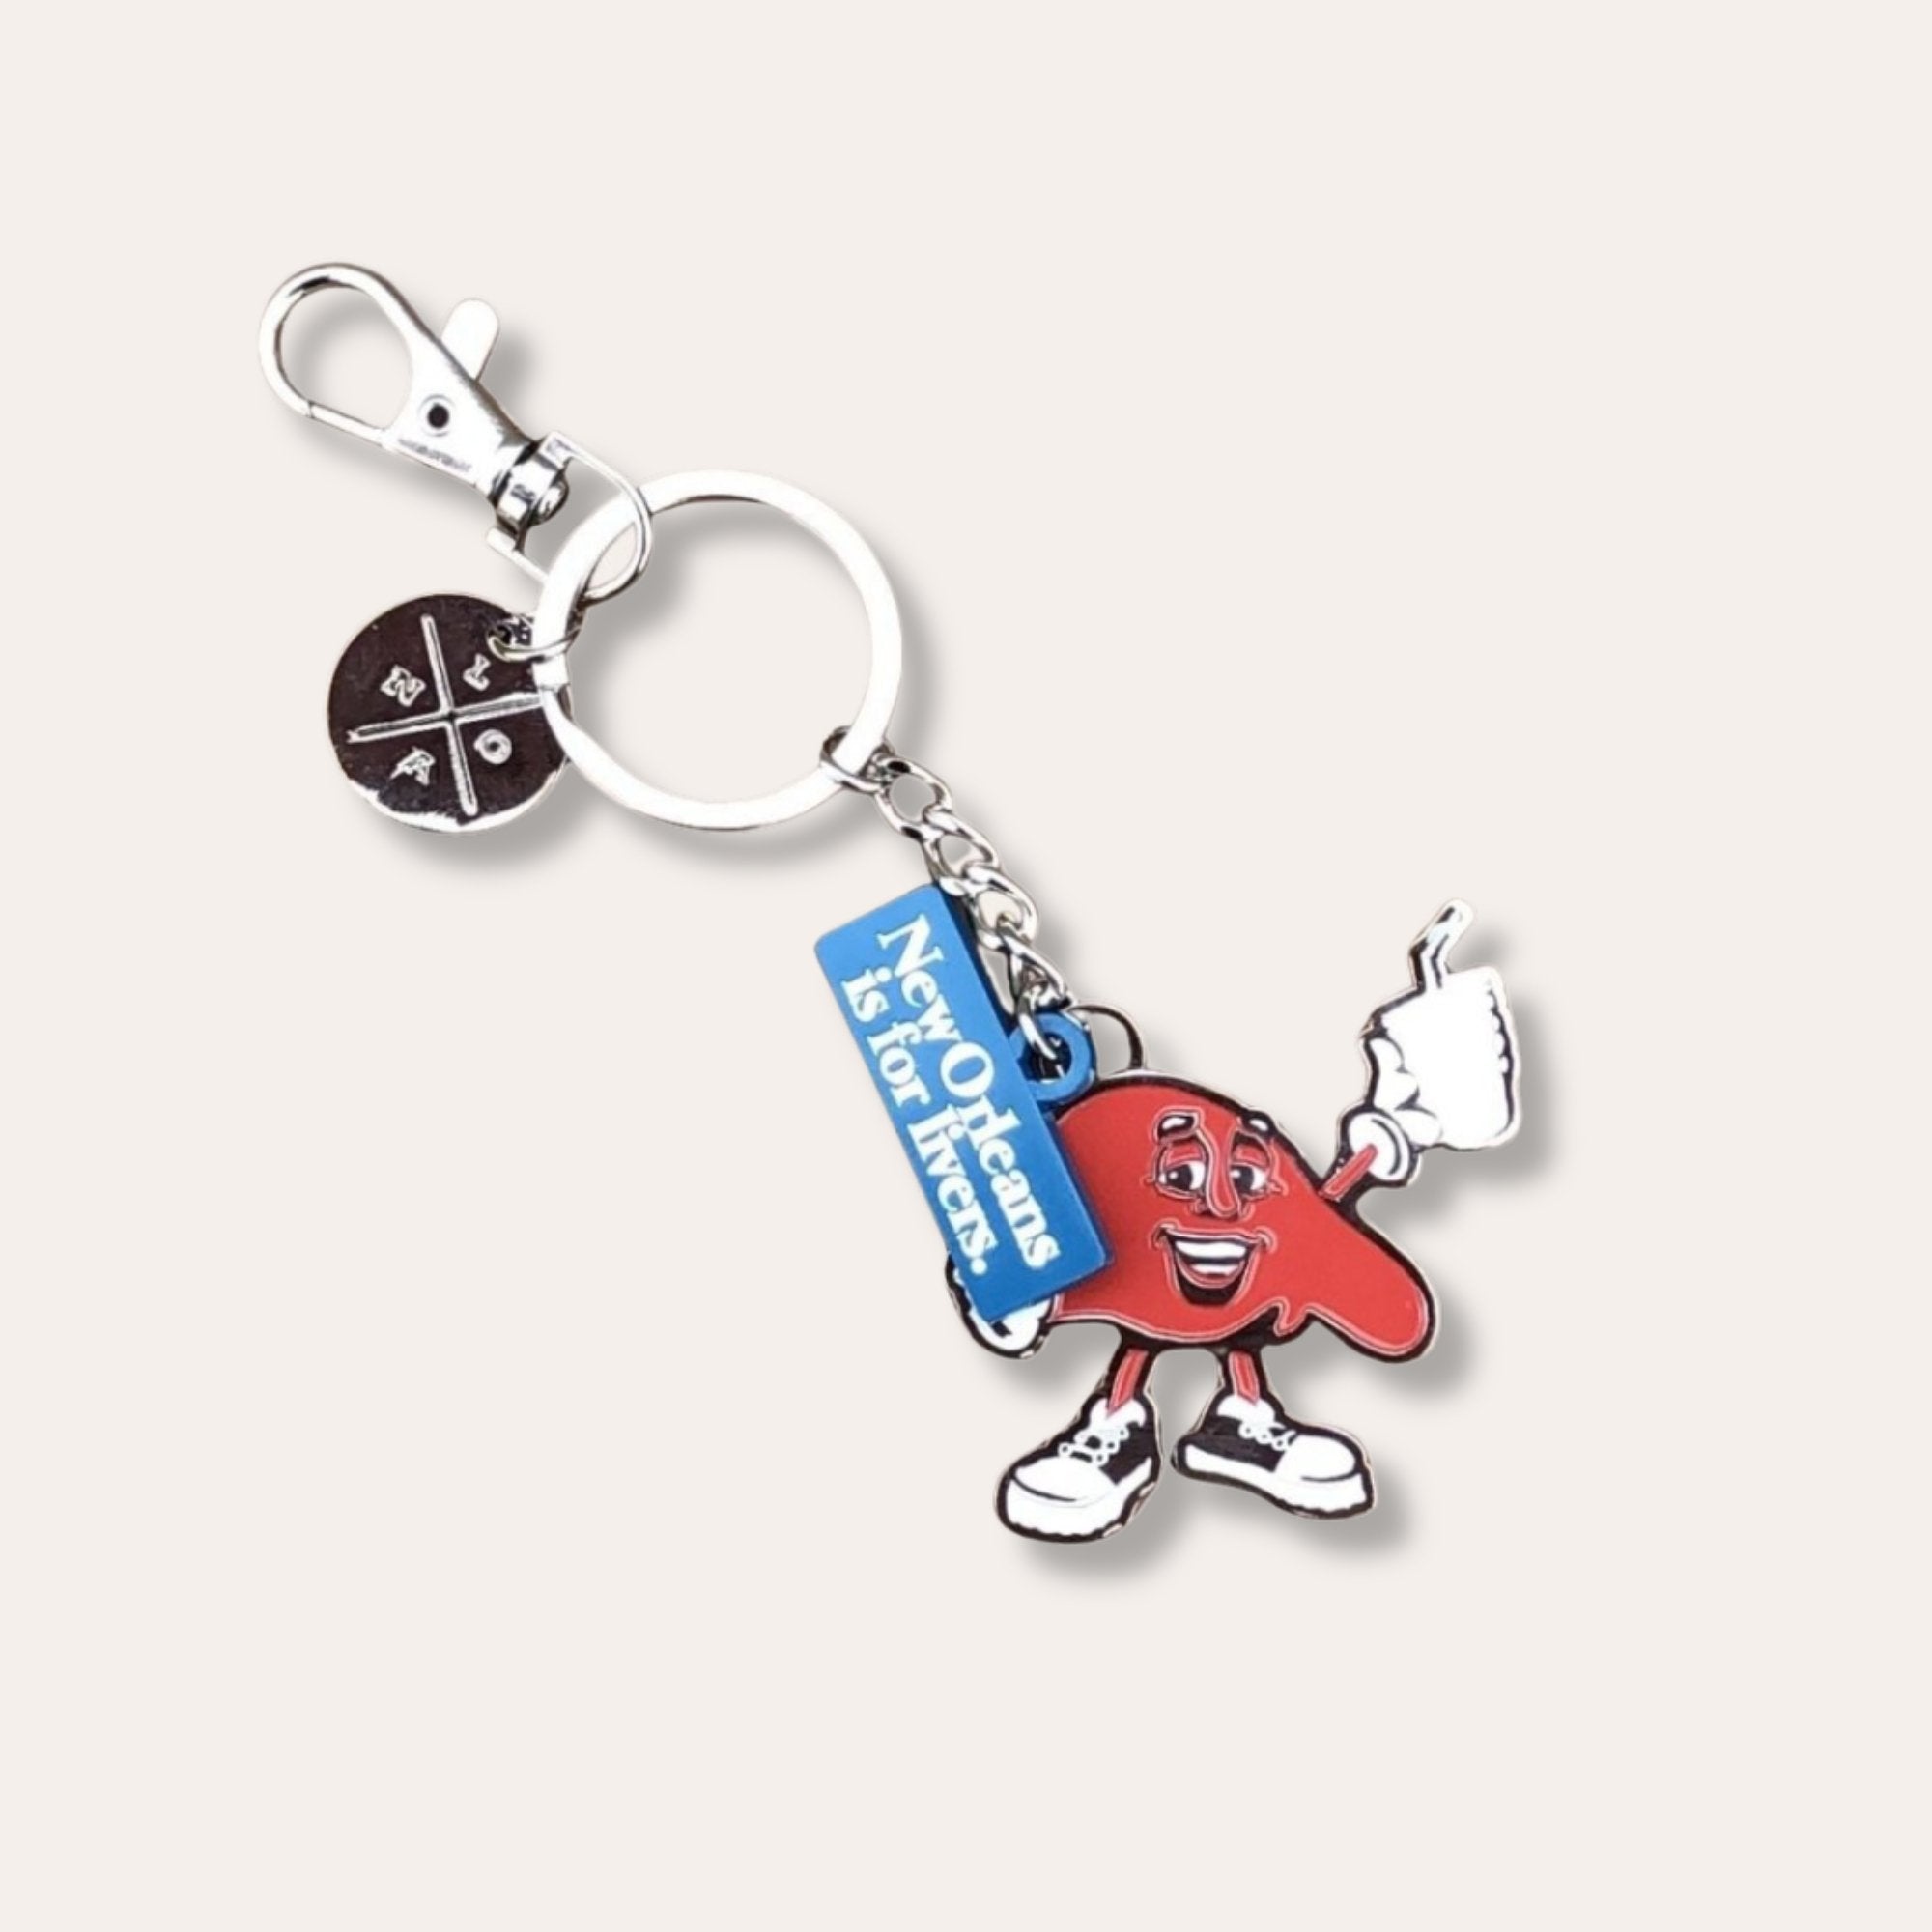 New Orleans is for Livers Keychain - Dirty Coast Press